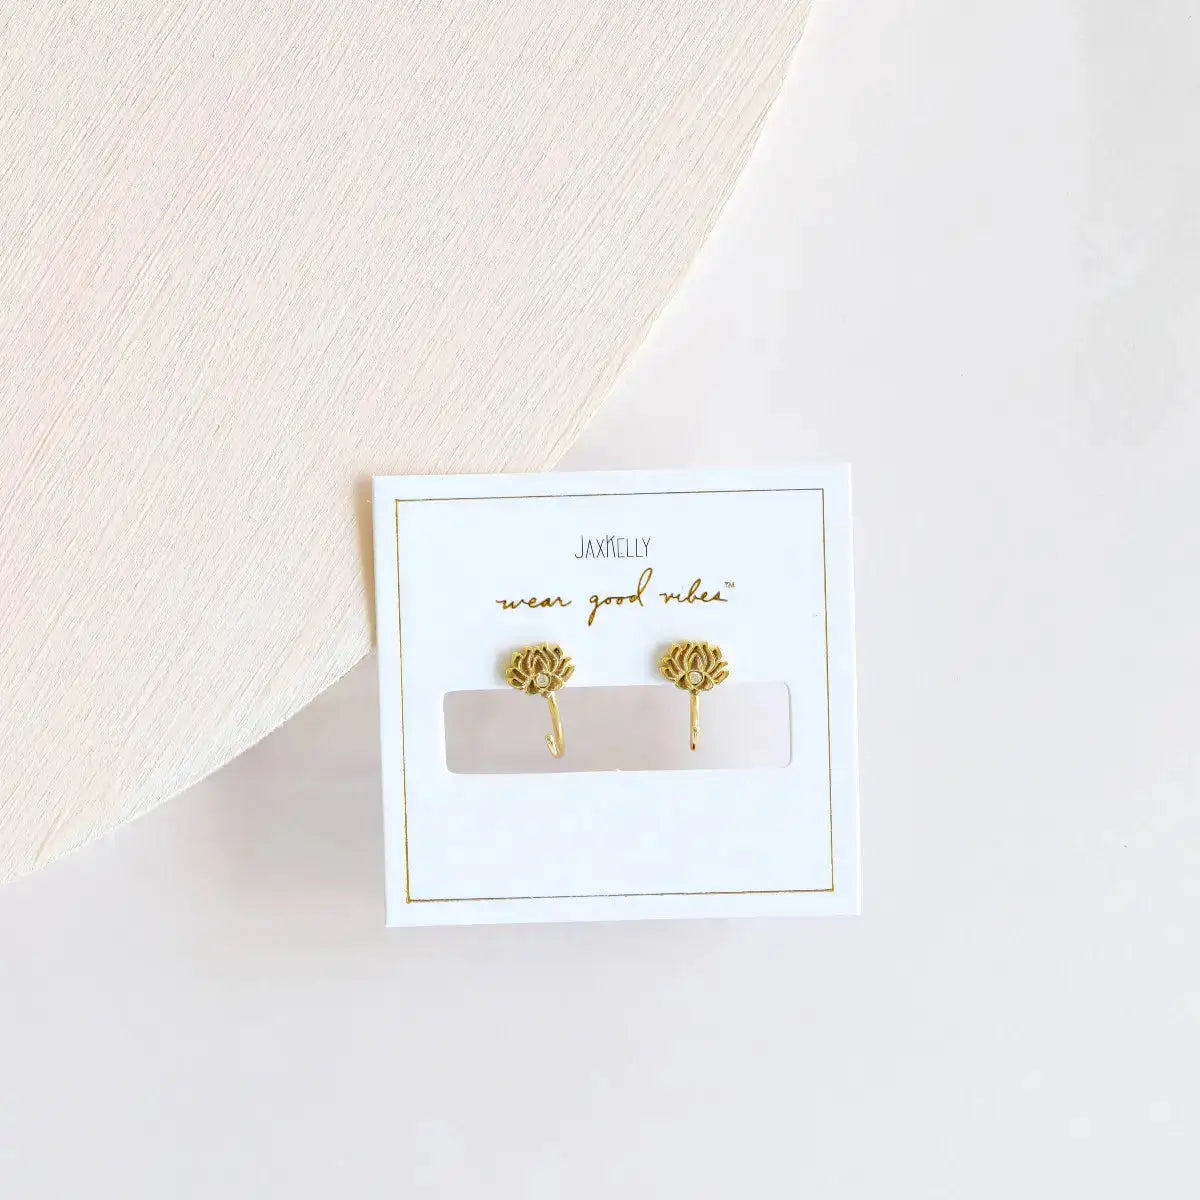 a pair of lotus earrings sitting on a table